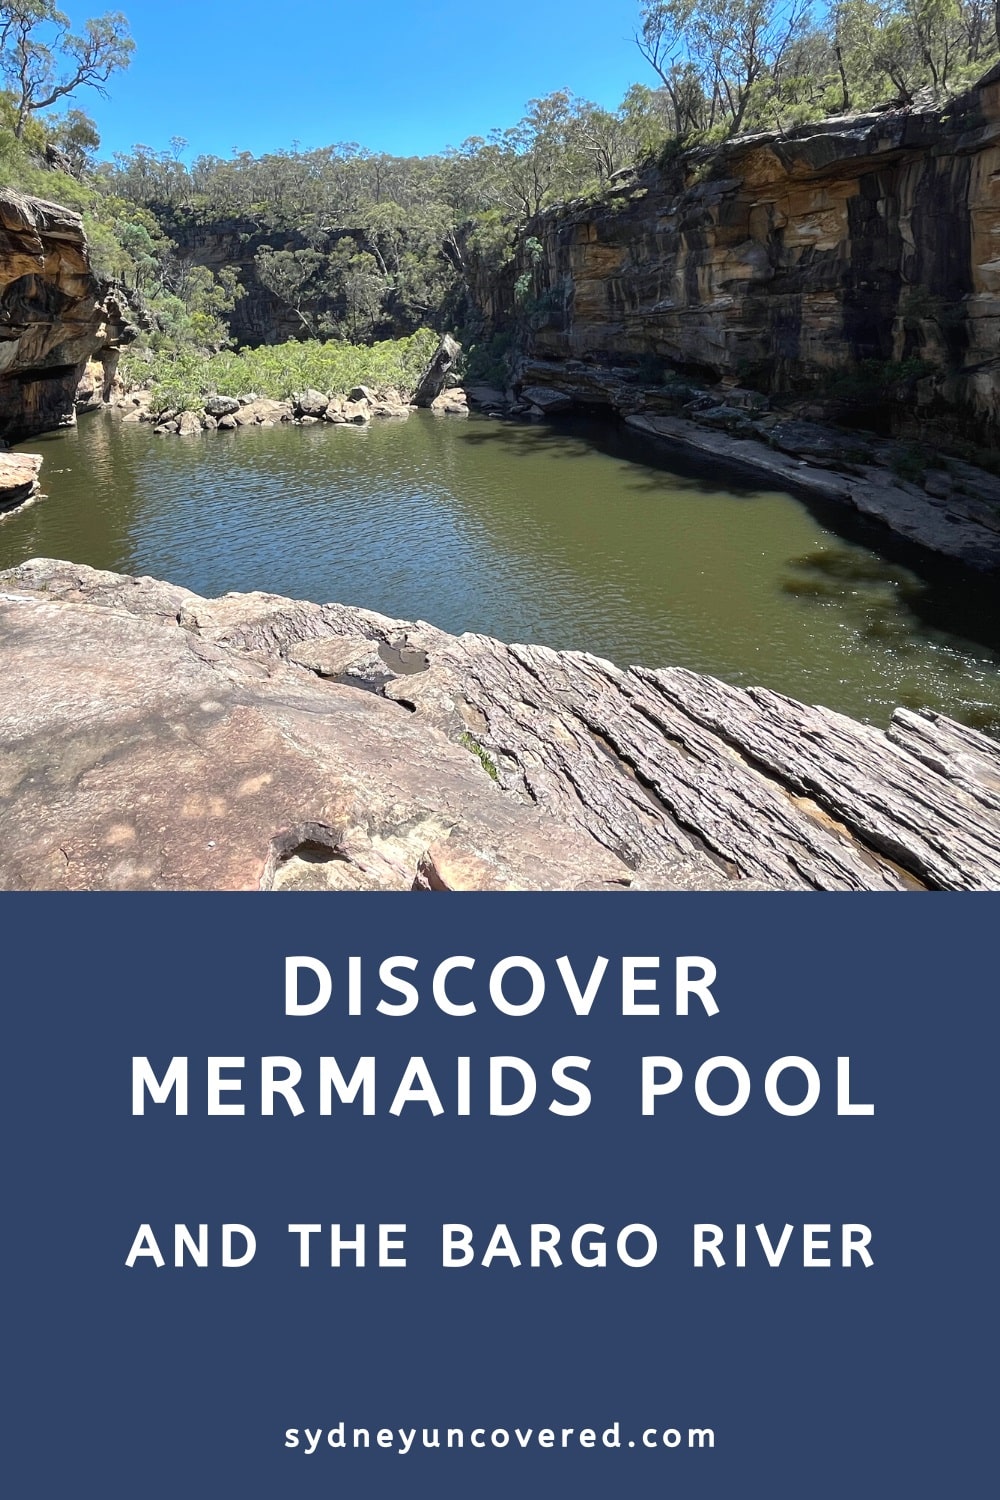 Discover Mermaids Pool and the Bargo River